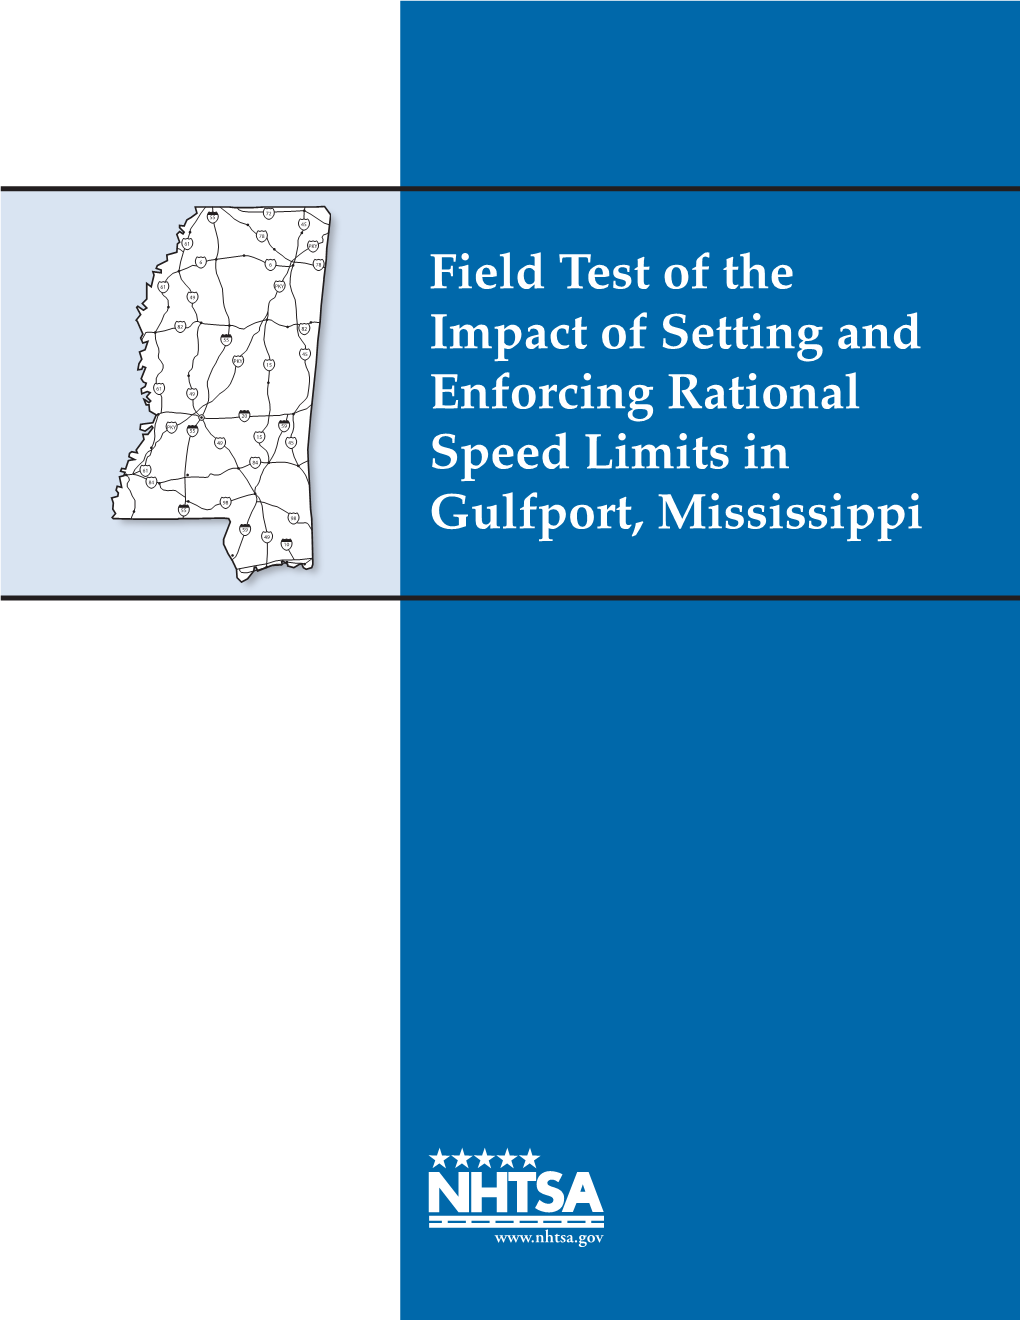 Field Test of the Impact of Setting and Enforcing Rational Speed Limits in Gulfport, Mississippi